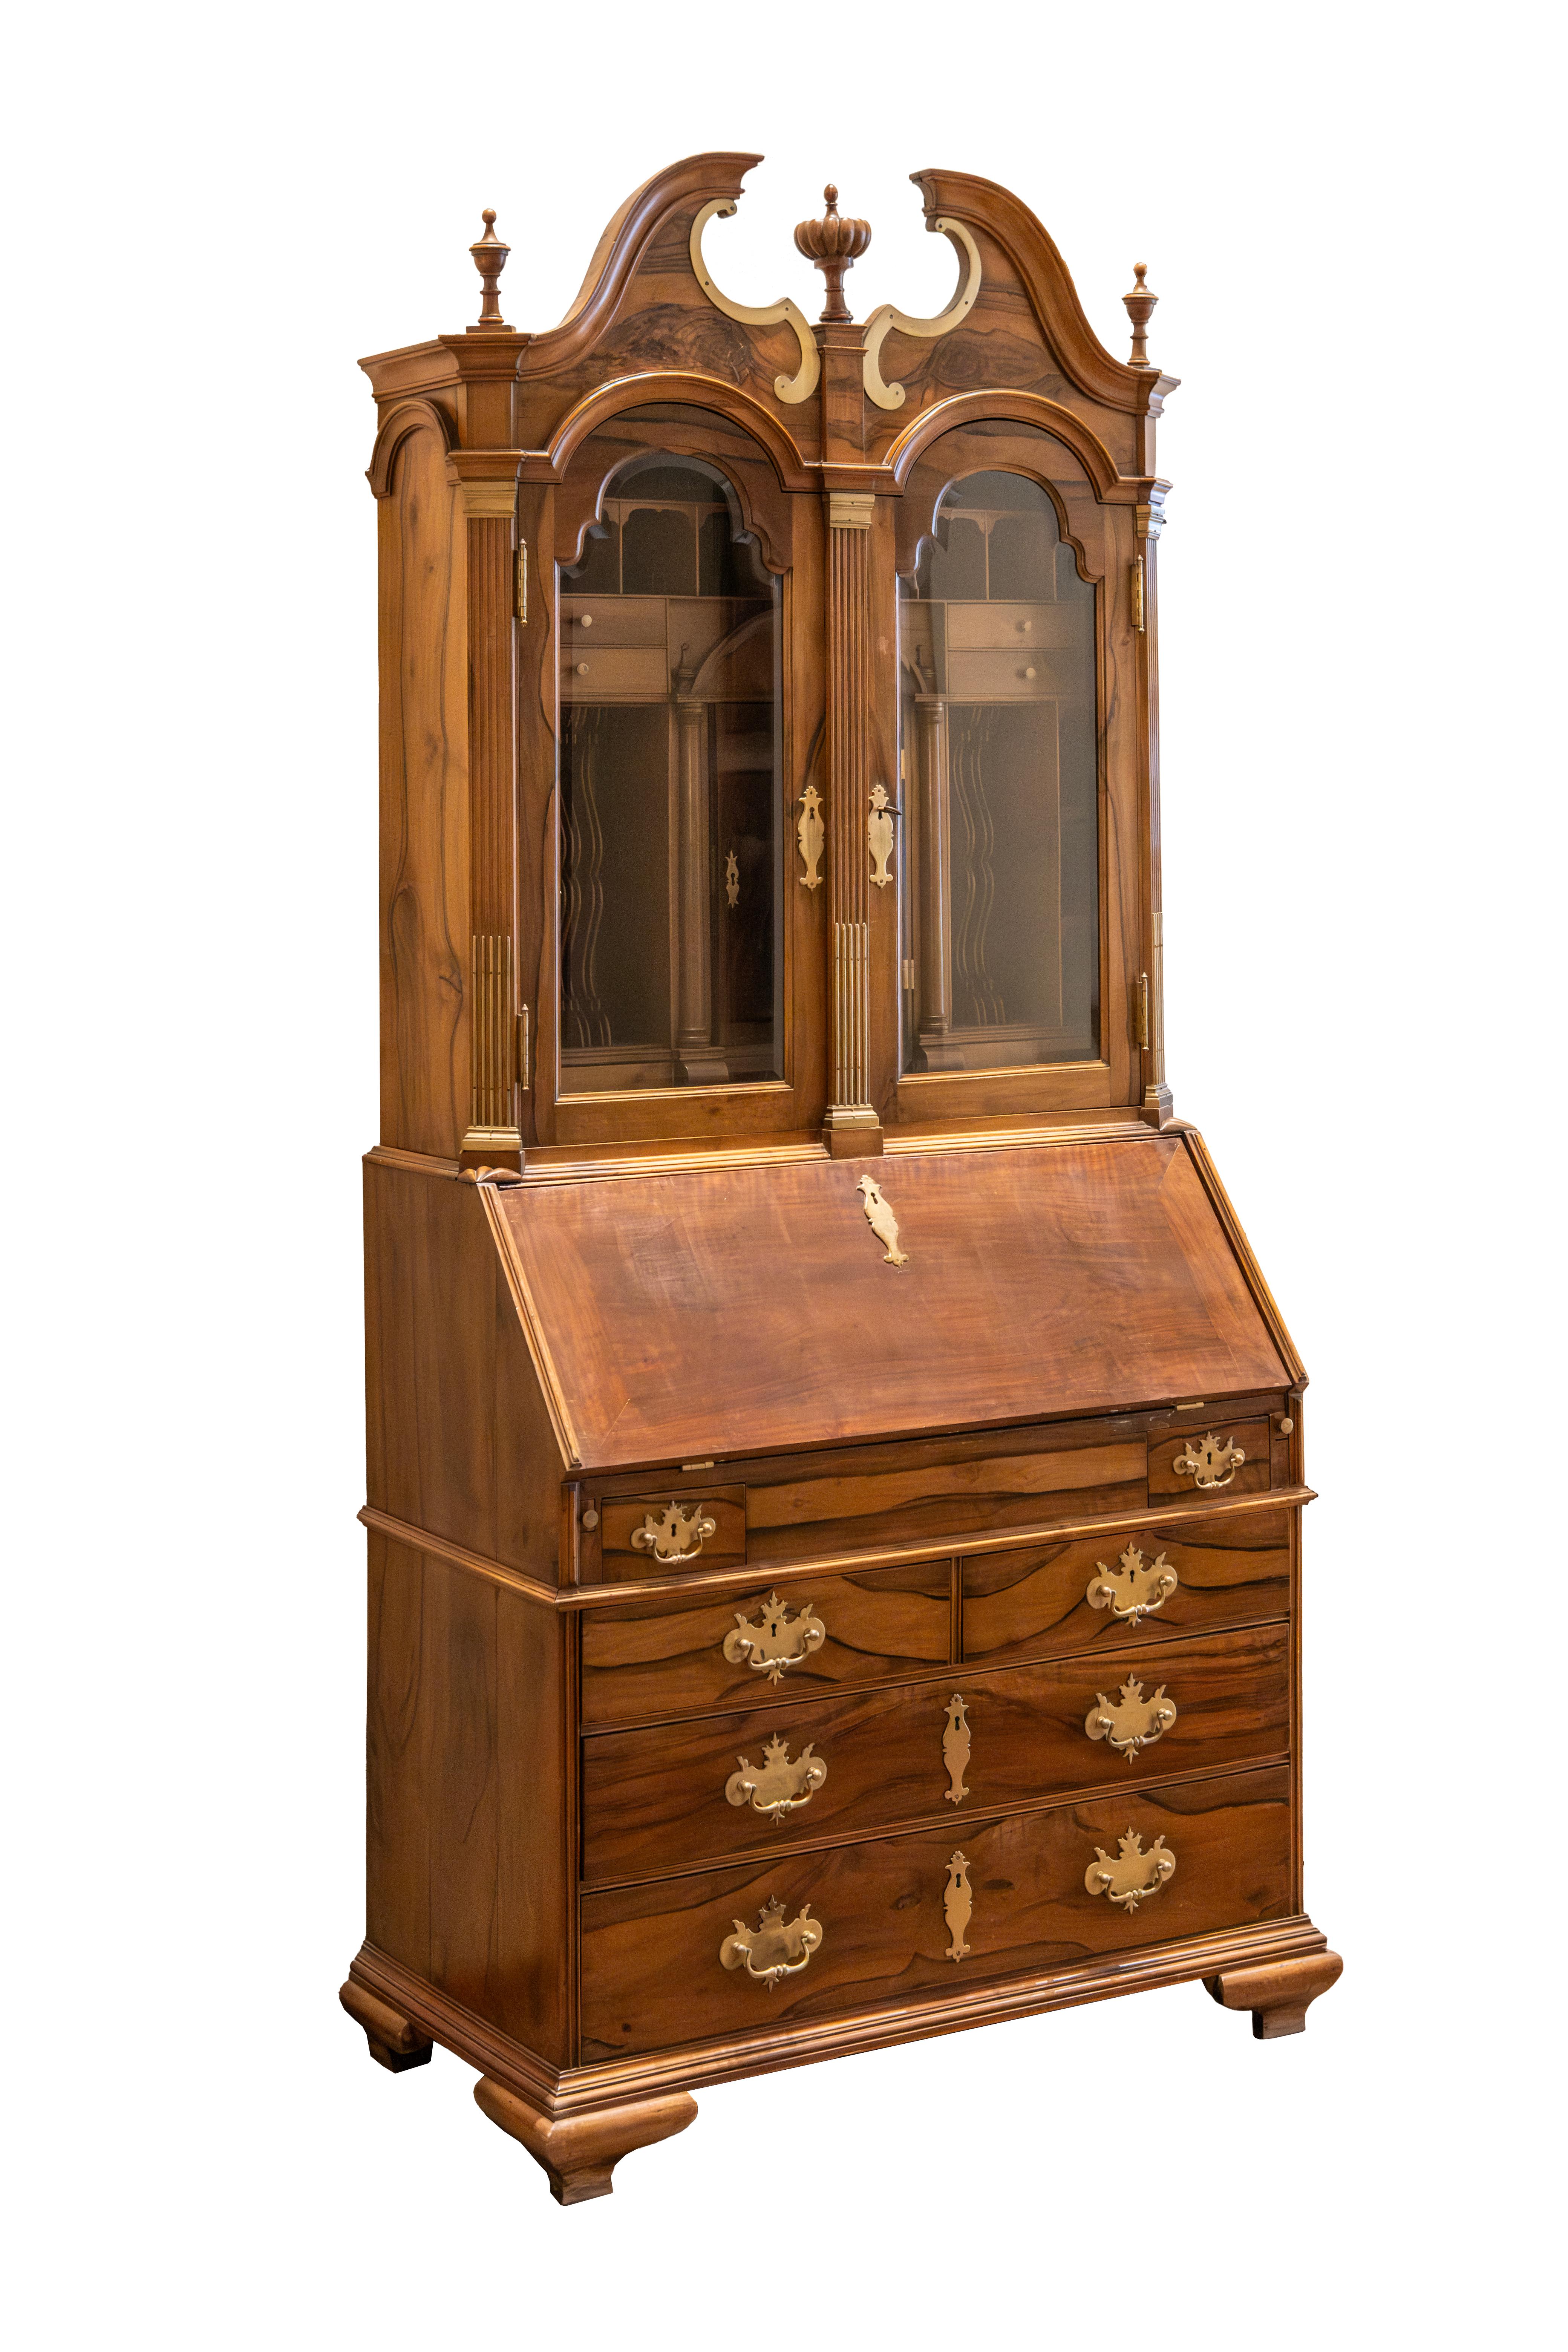 Baroque Tall Walnut Cabinet with a Bureau Desk Compartment For Sale